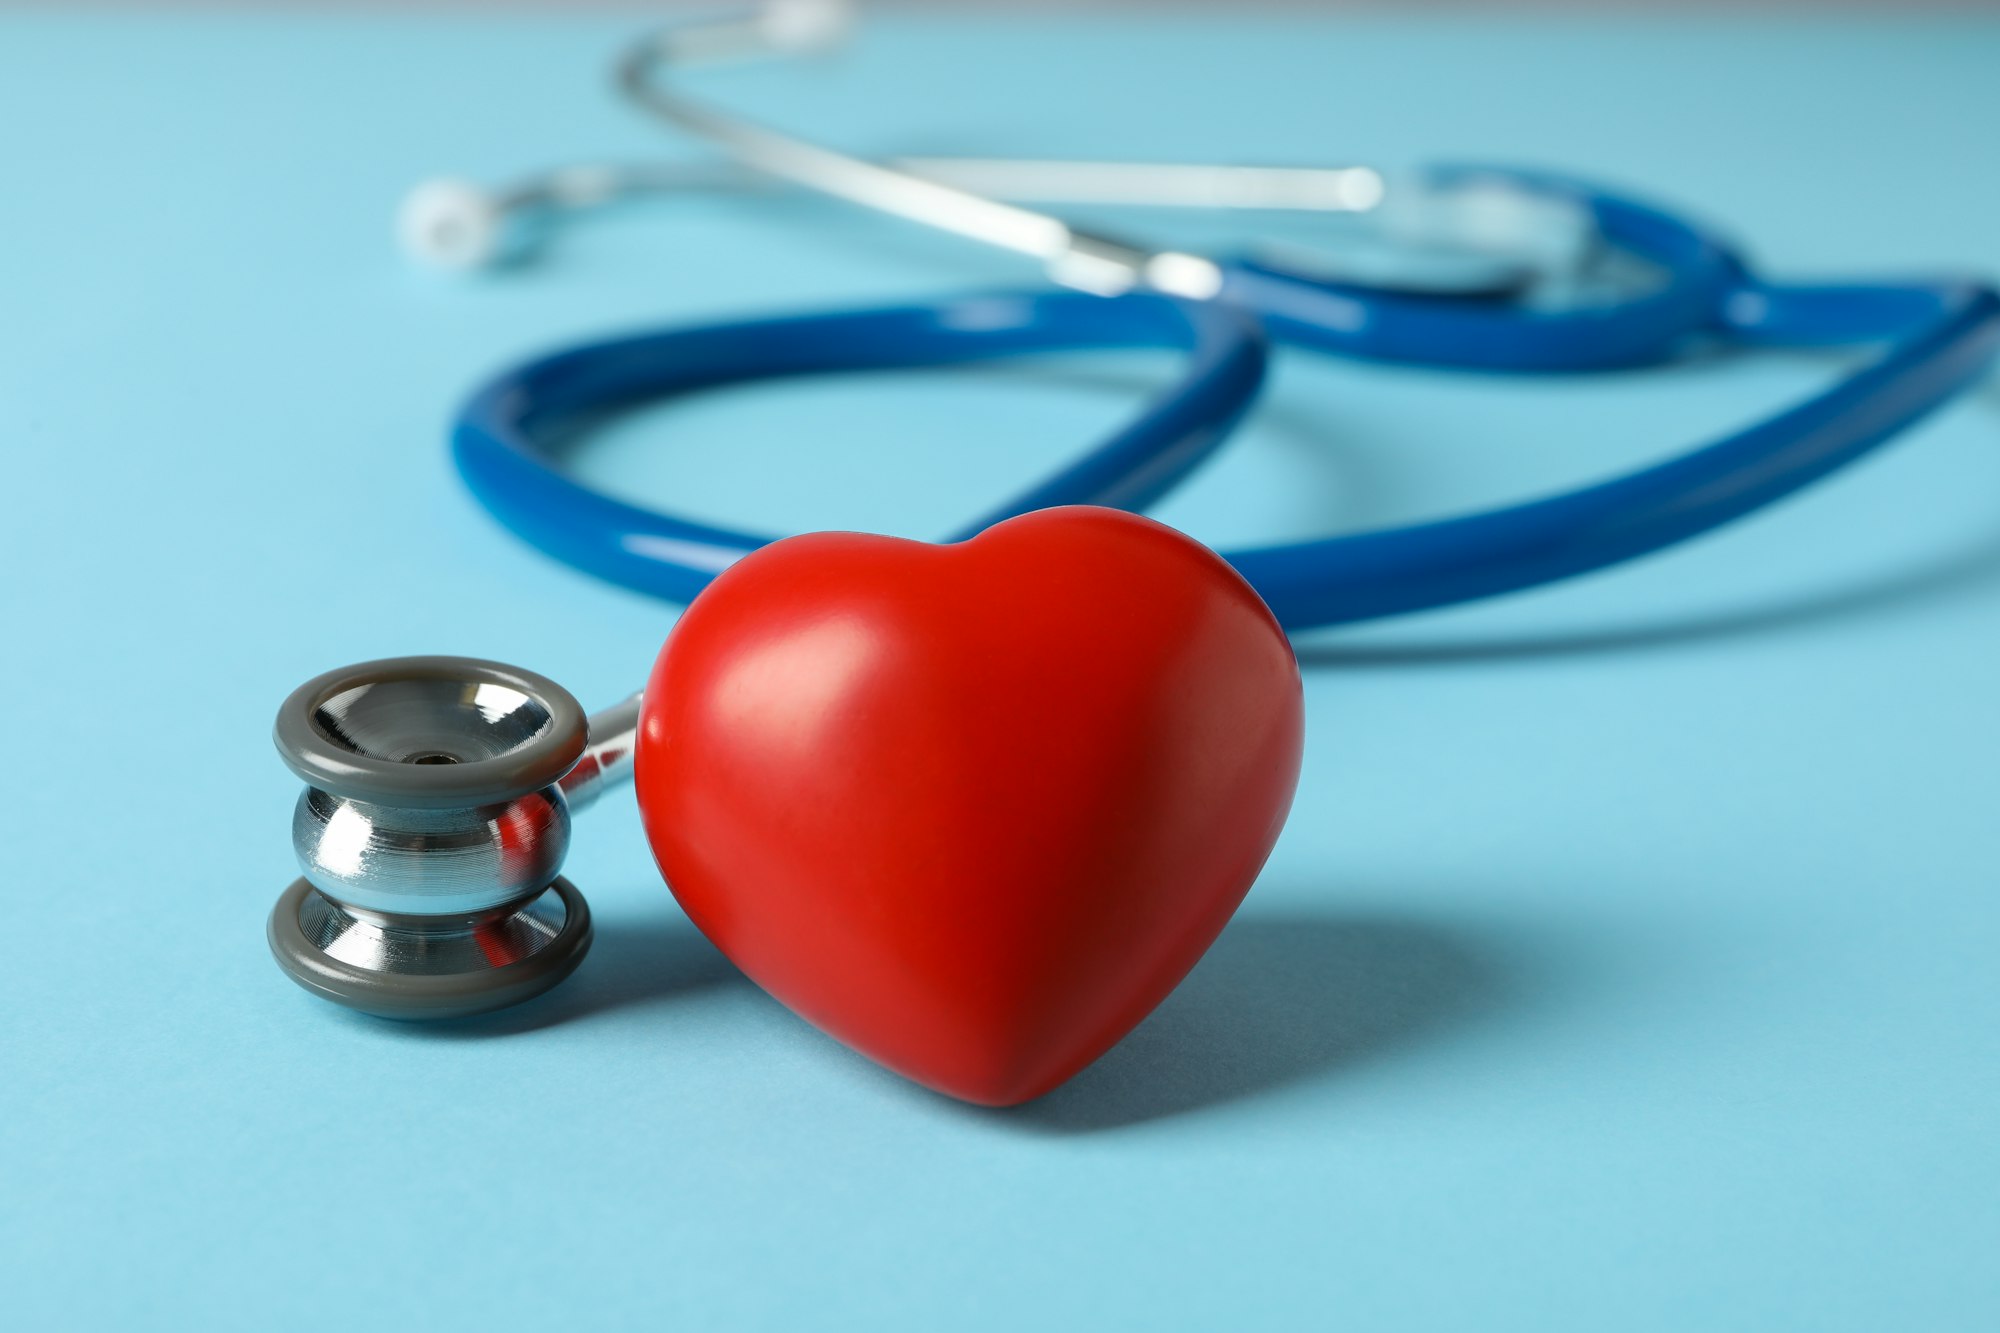 Stethoscope and heart on blue background, close up